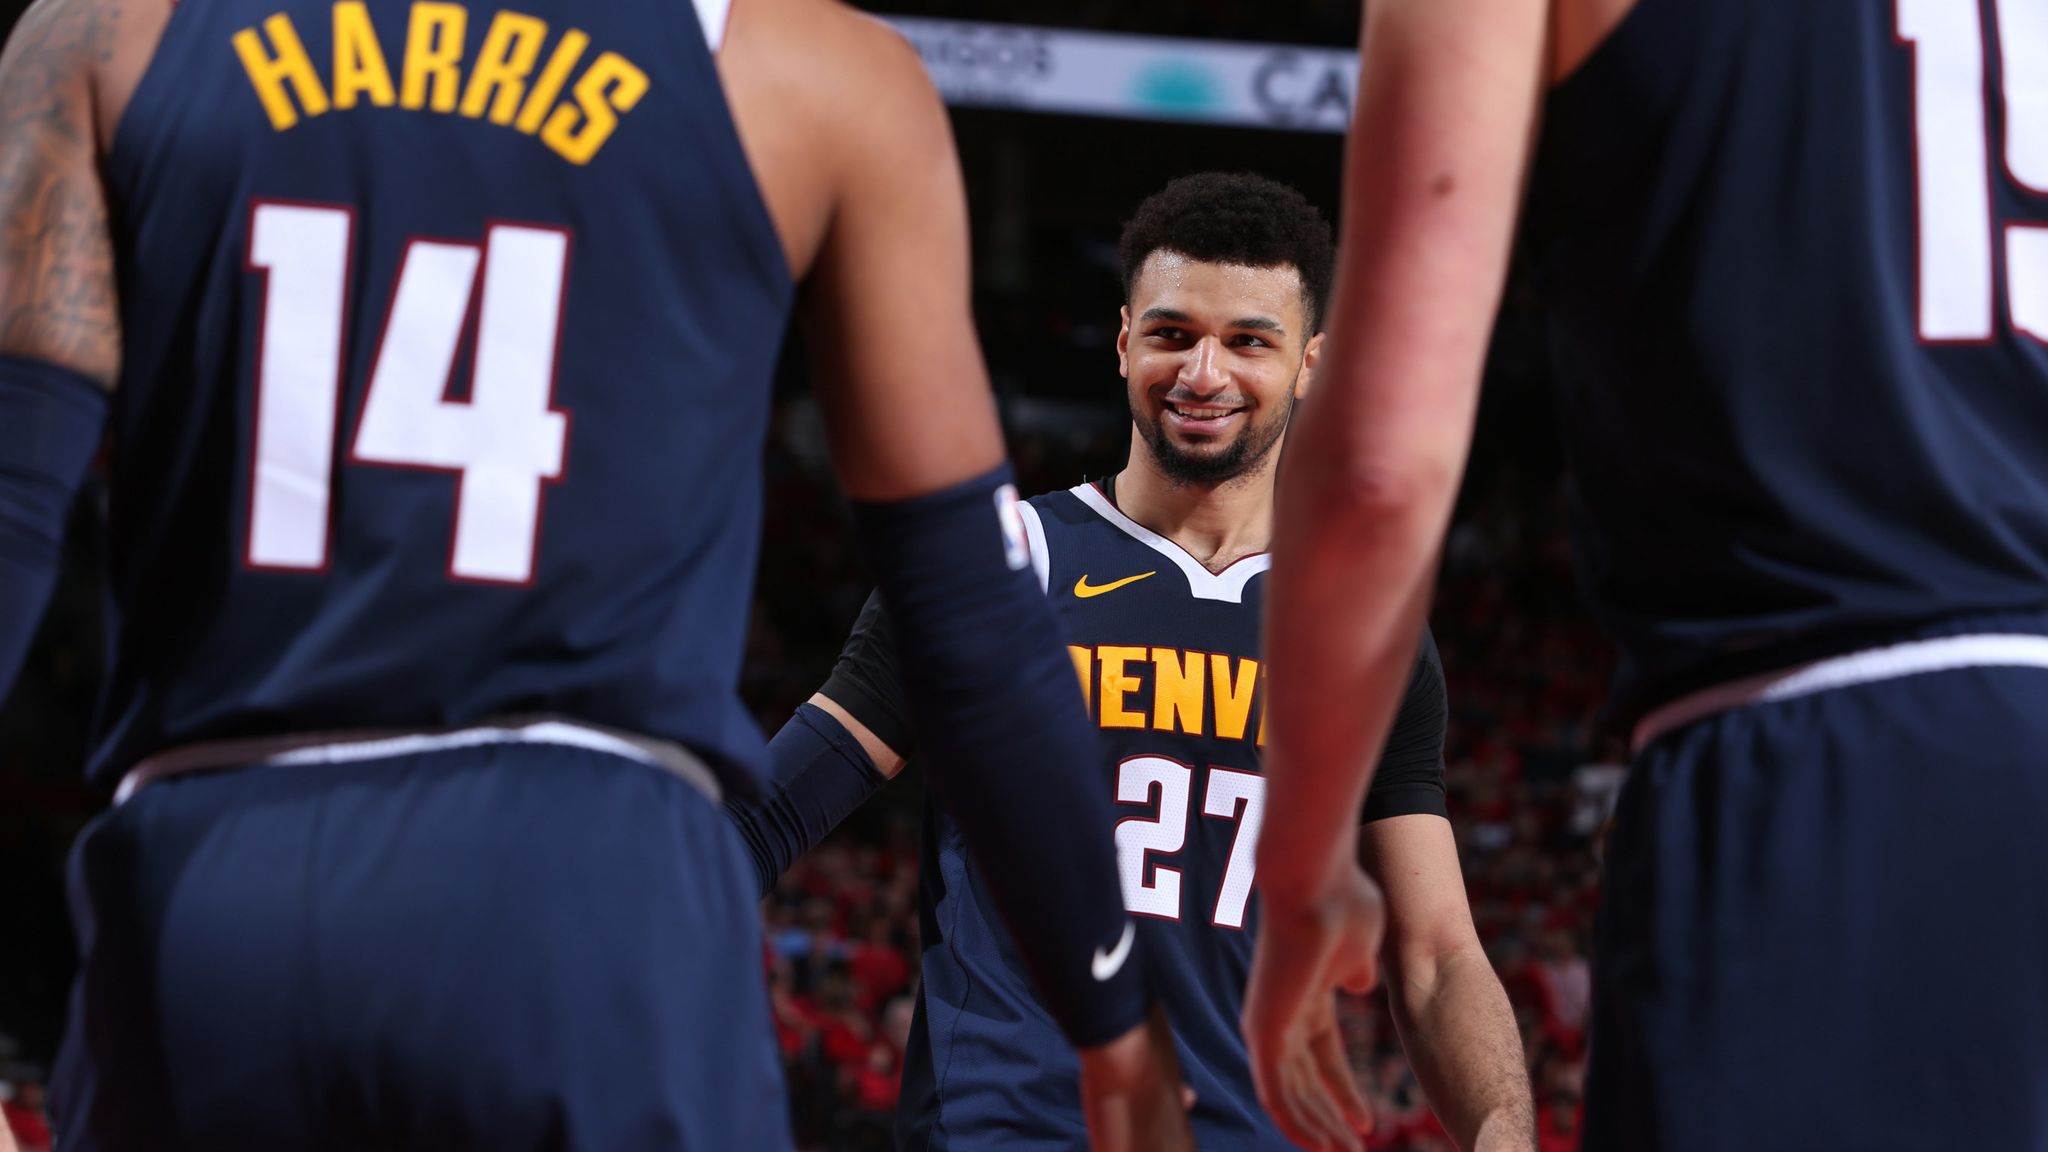 Basketball Forever  Jamal Murray DOMINATES with 34 PTS 9 AST  6 THREES  as the Nuggets BLOWOUT the Suns 125107 TO TAKE A 10 SERIES LEAD    Facebook